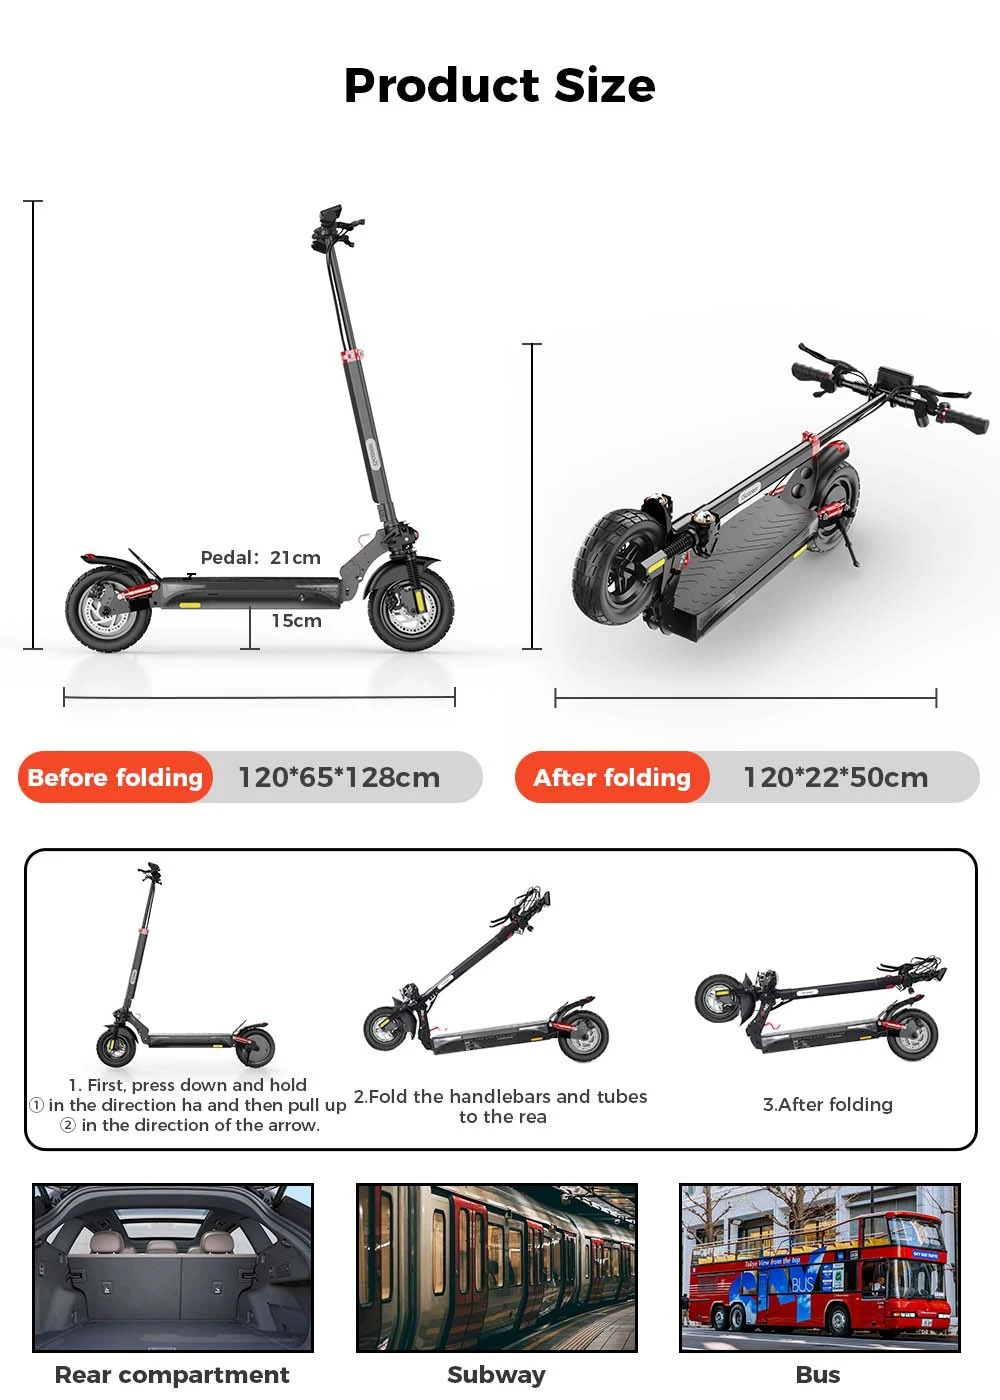 https://img.gkbcdn.com/d/202303/iScooter-IX4-Electric-Scooter-10---Honeycomb-Tires-519918-25._p1_.jpg